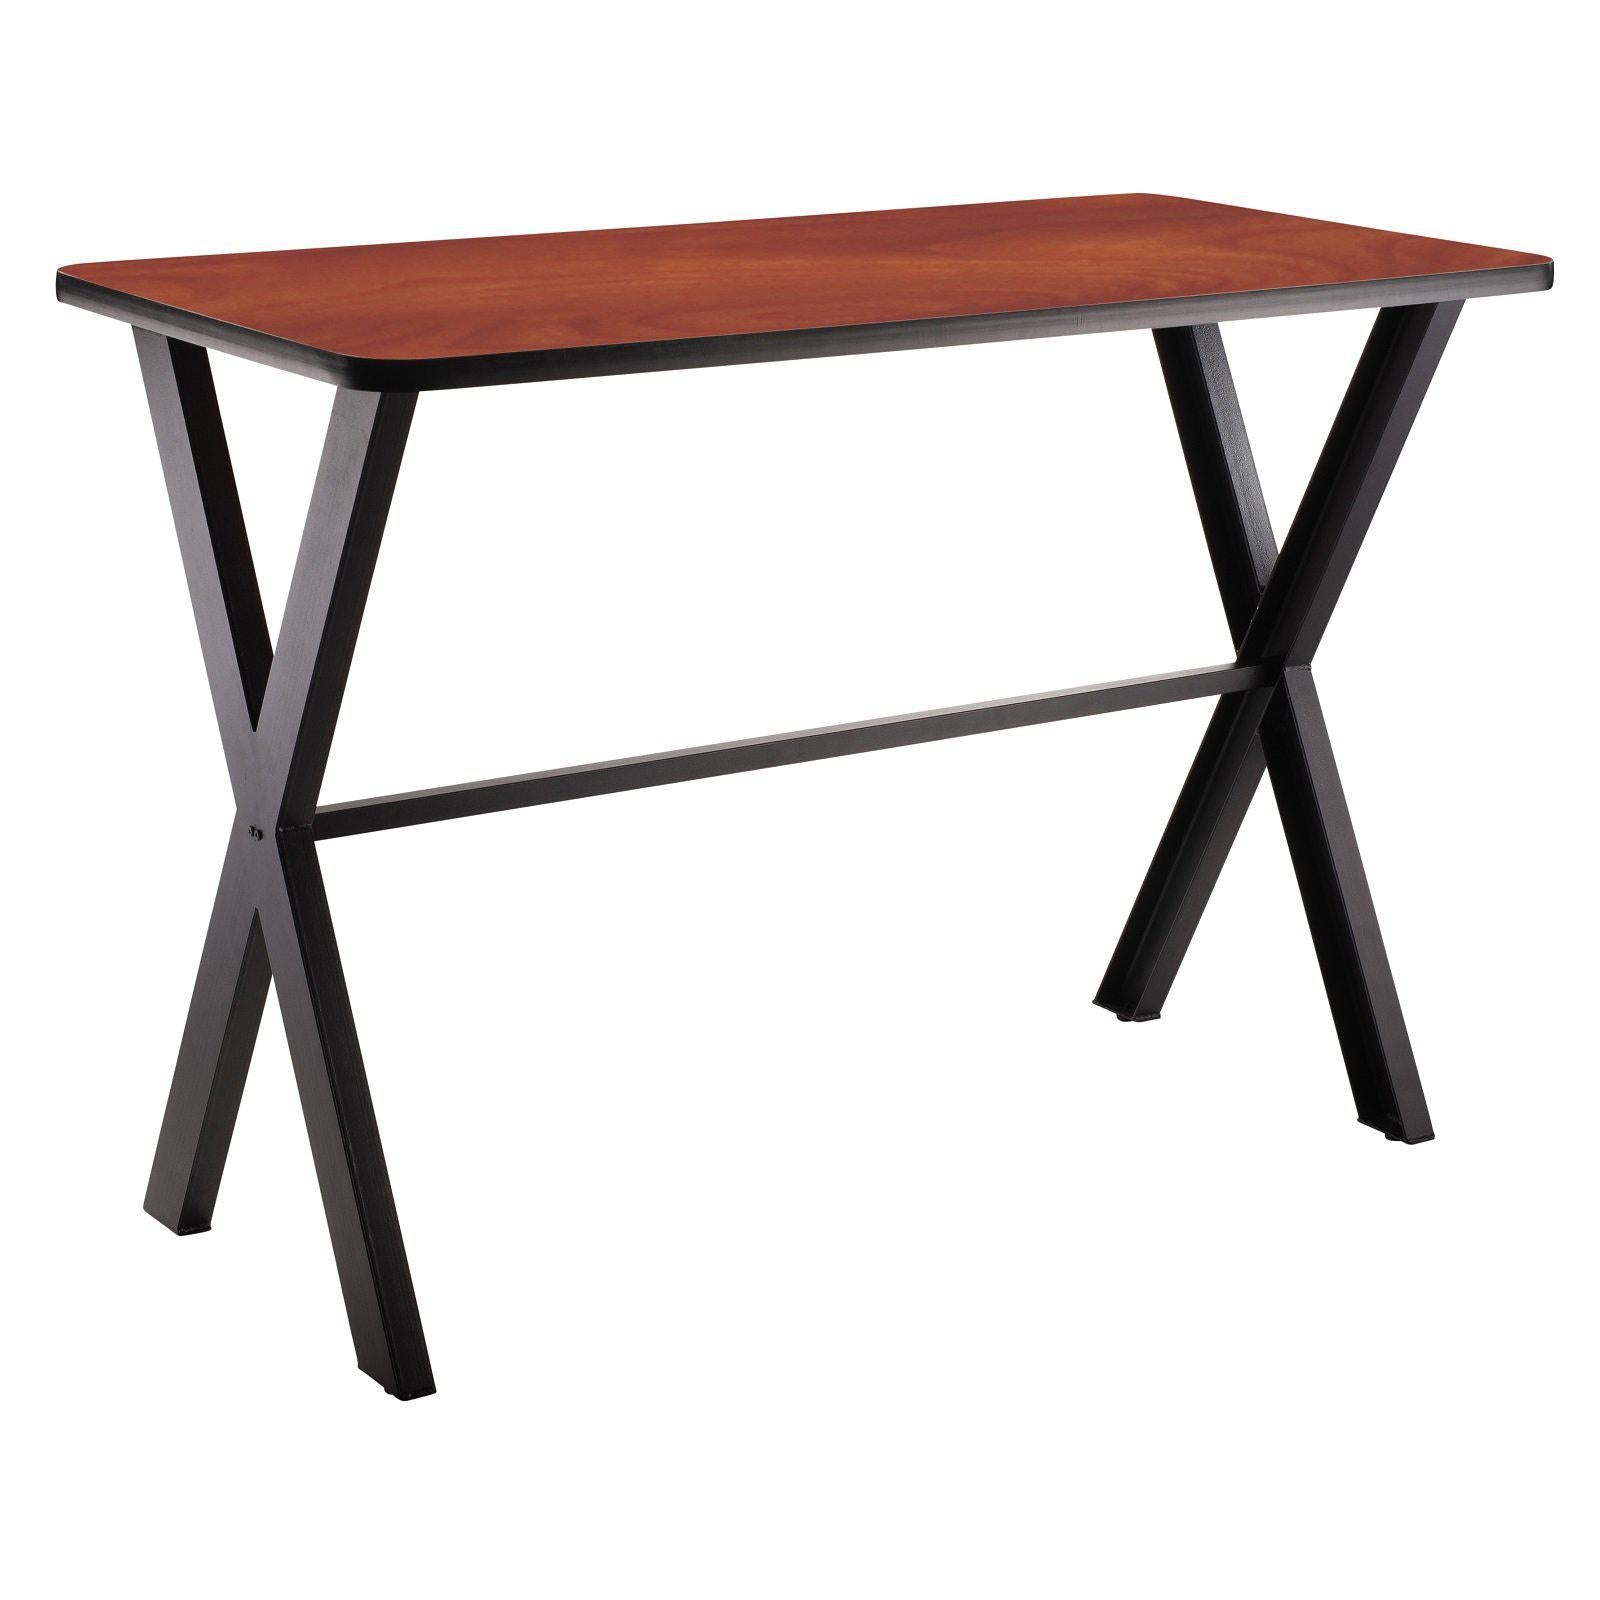 Collaborator Table, 36" x 72", Rectangle, 42" Bar Height w/ Crossbeam, High Pressure Laminate Top, MDF Core